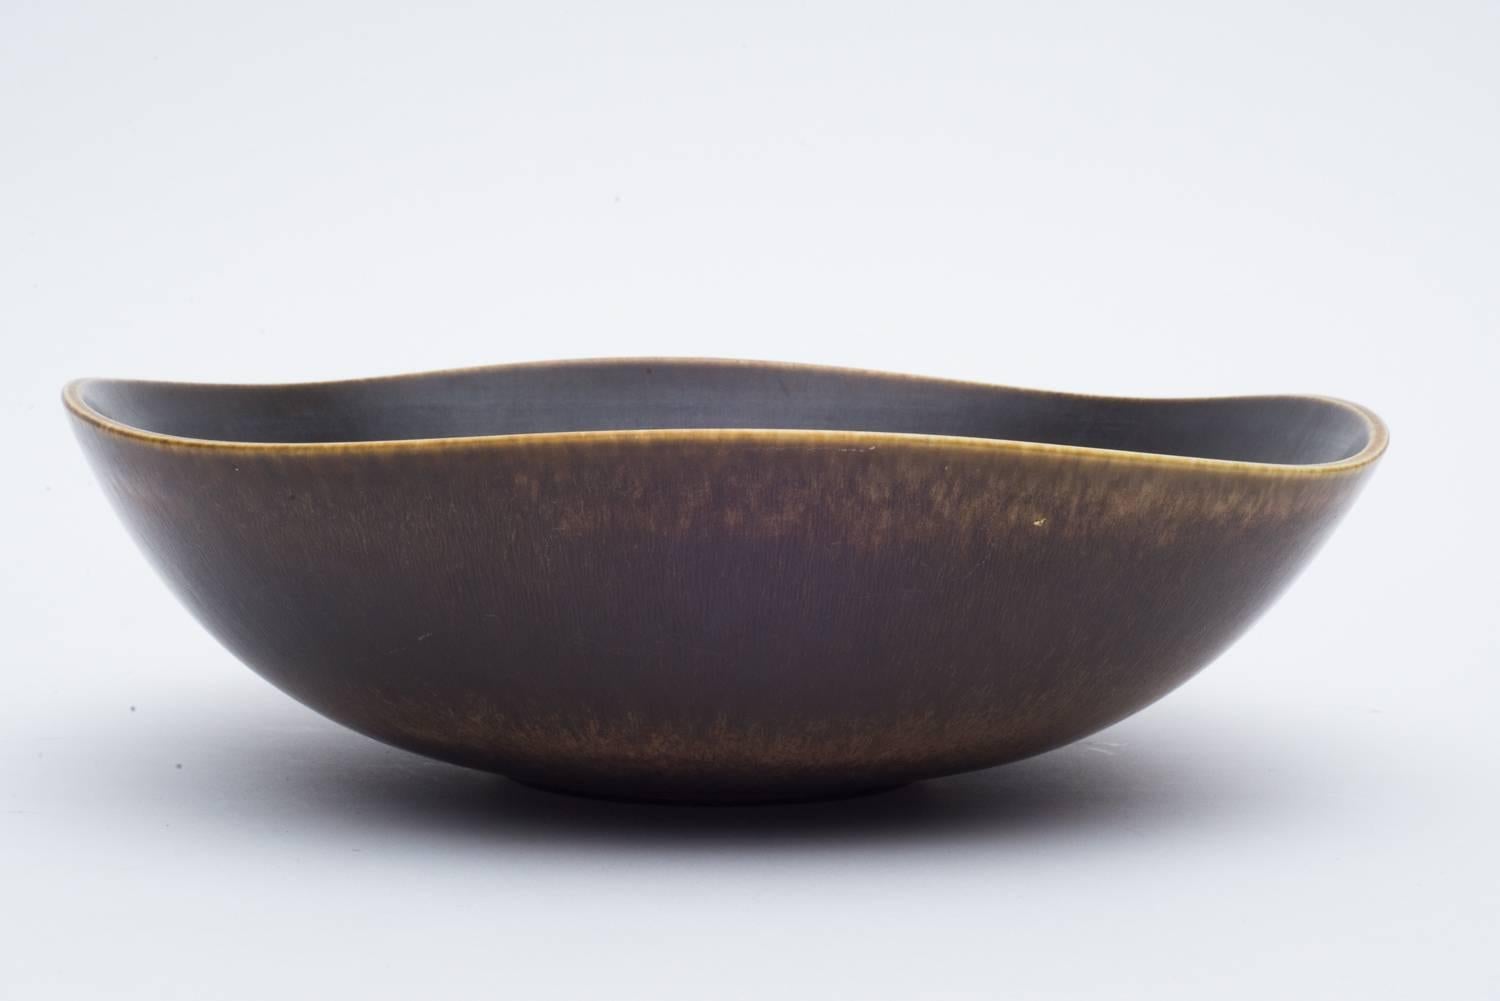 Berndt Friberg (1899-1981) is one of the most renowned ceramicists from Sweden during the 20th century. He is well-known for his organic forms and superior glazes. Berndt worked for the Gustavsberg factory from 1934-1981.